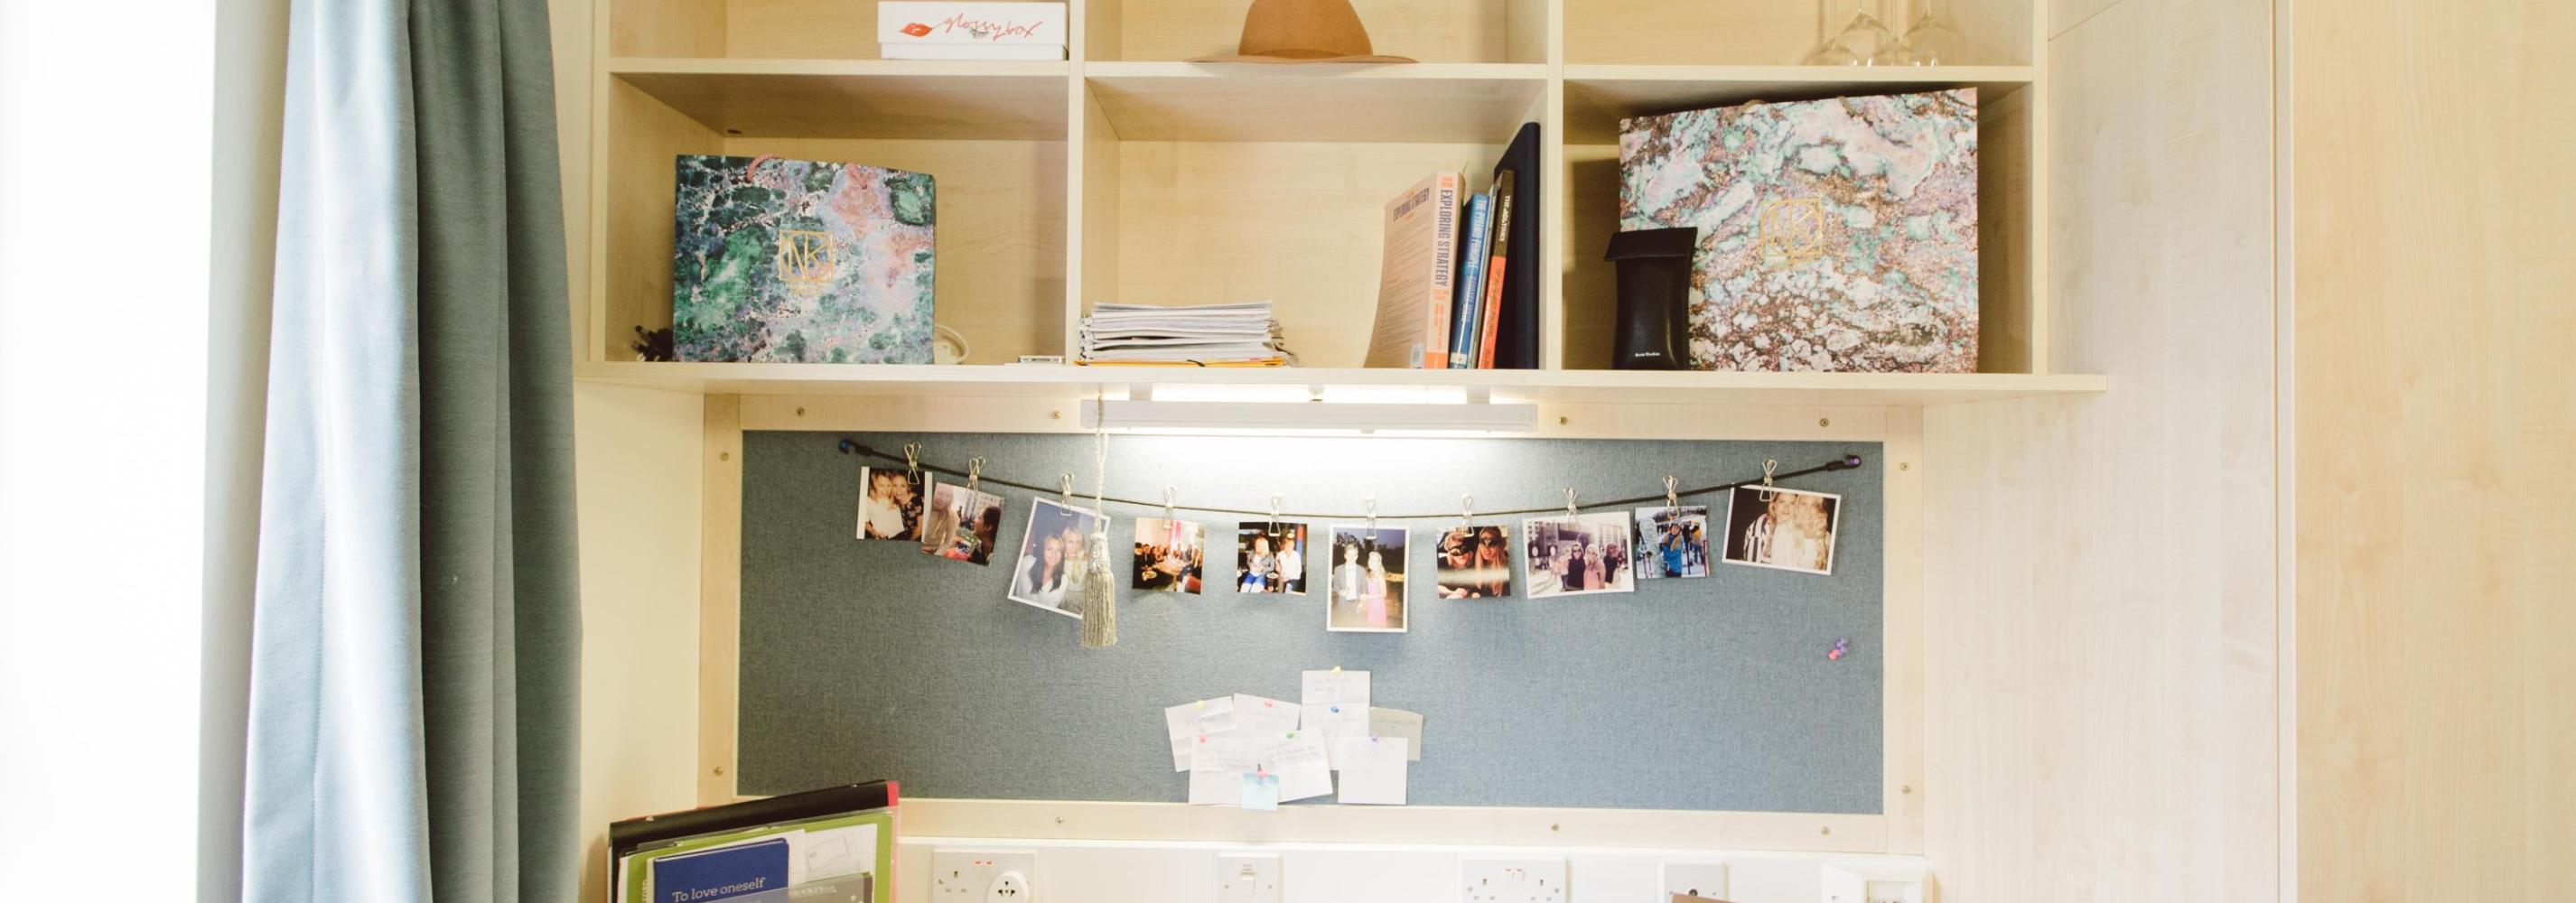 Built in wooden desk and shelving. Pin board with photos on the wall.